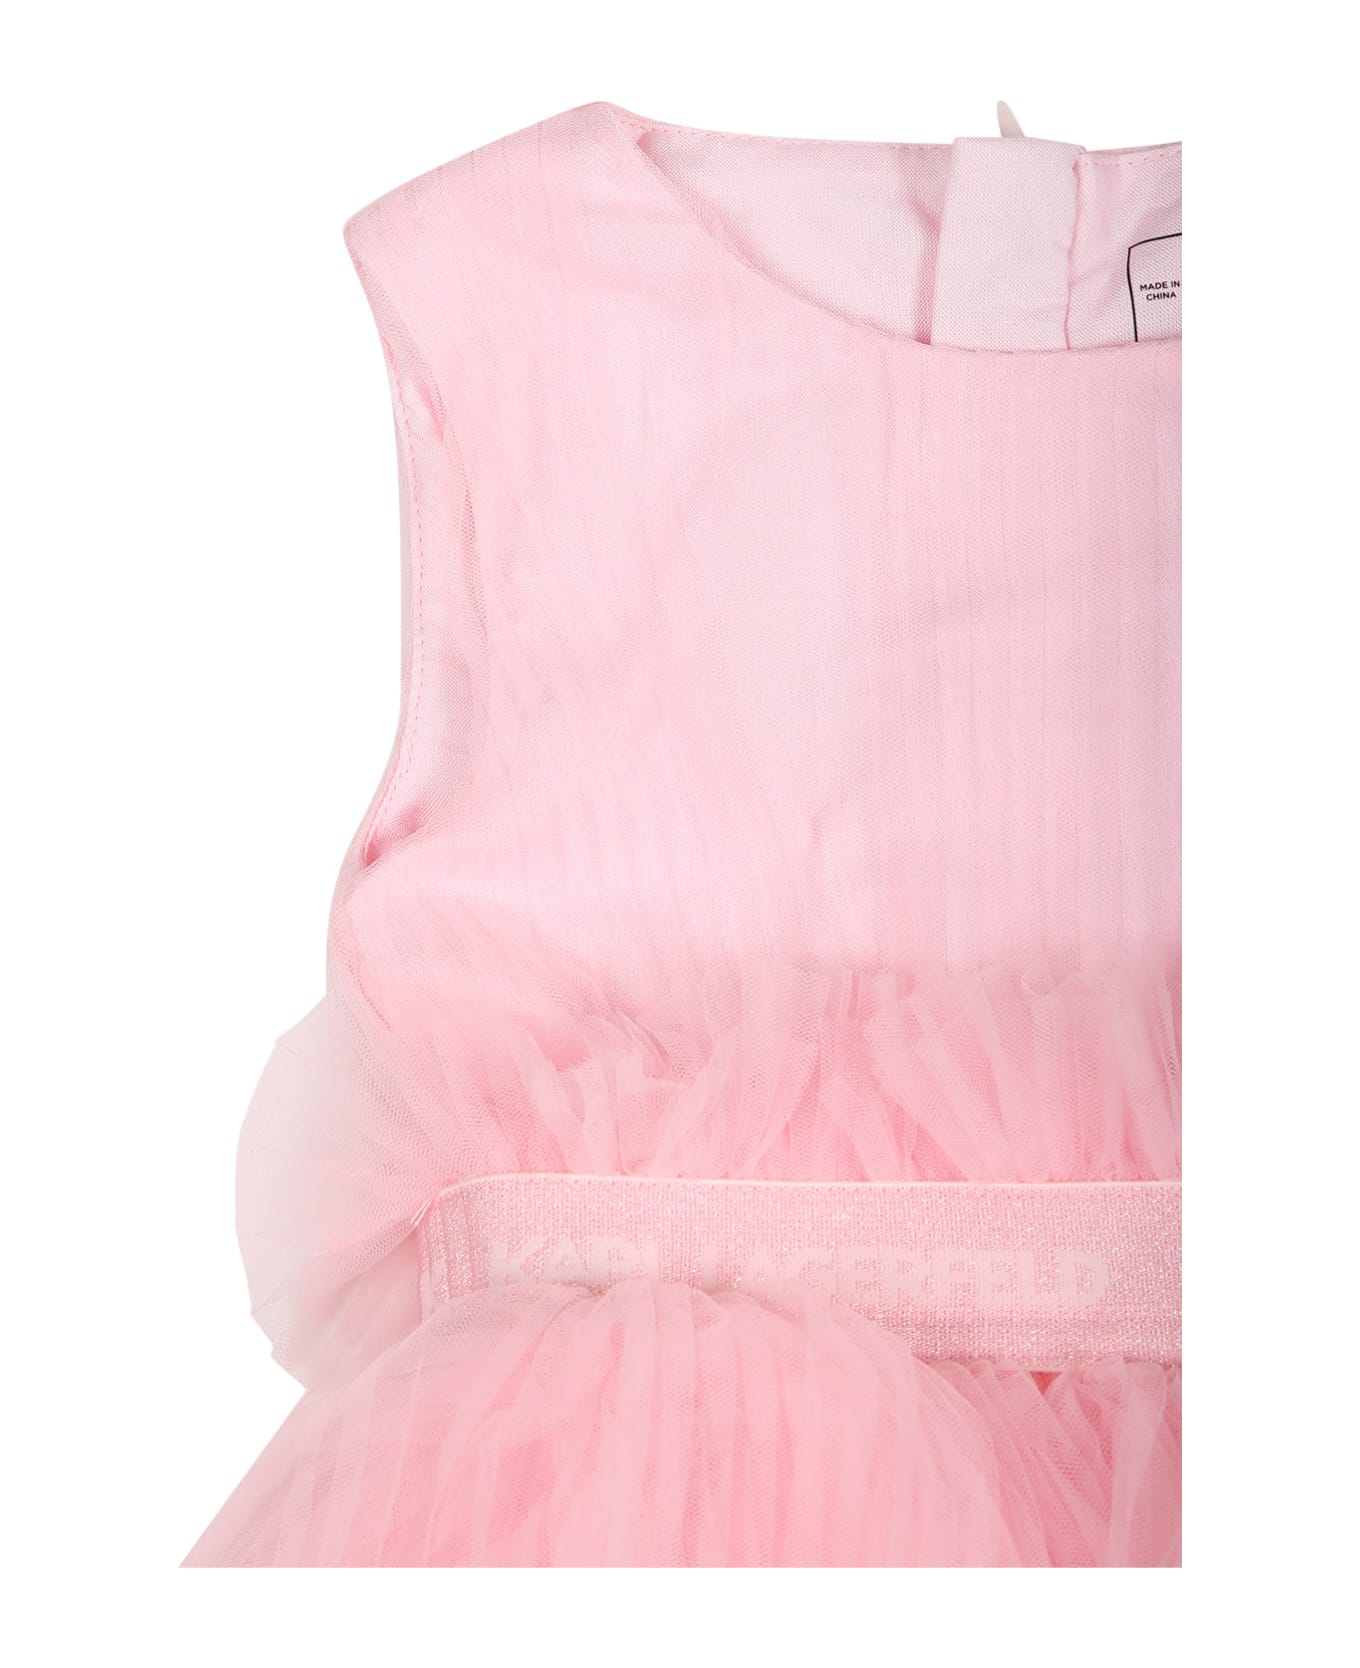 Karl Lagerfeld Kids Pink Dress For Baby Girl With Logo - Pink